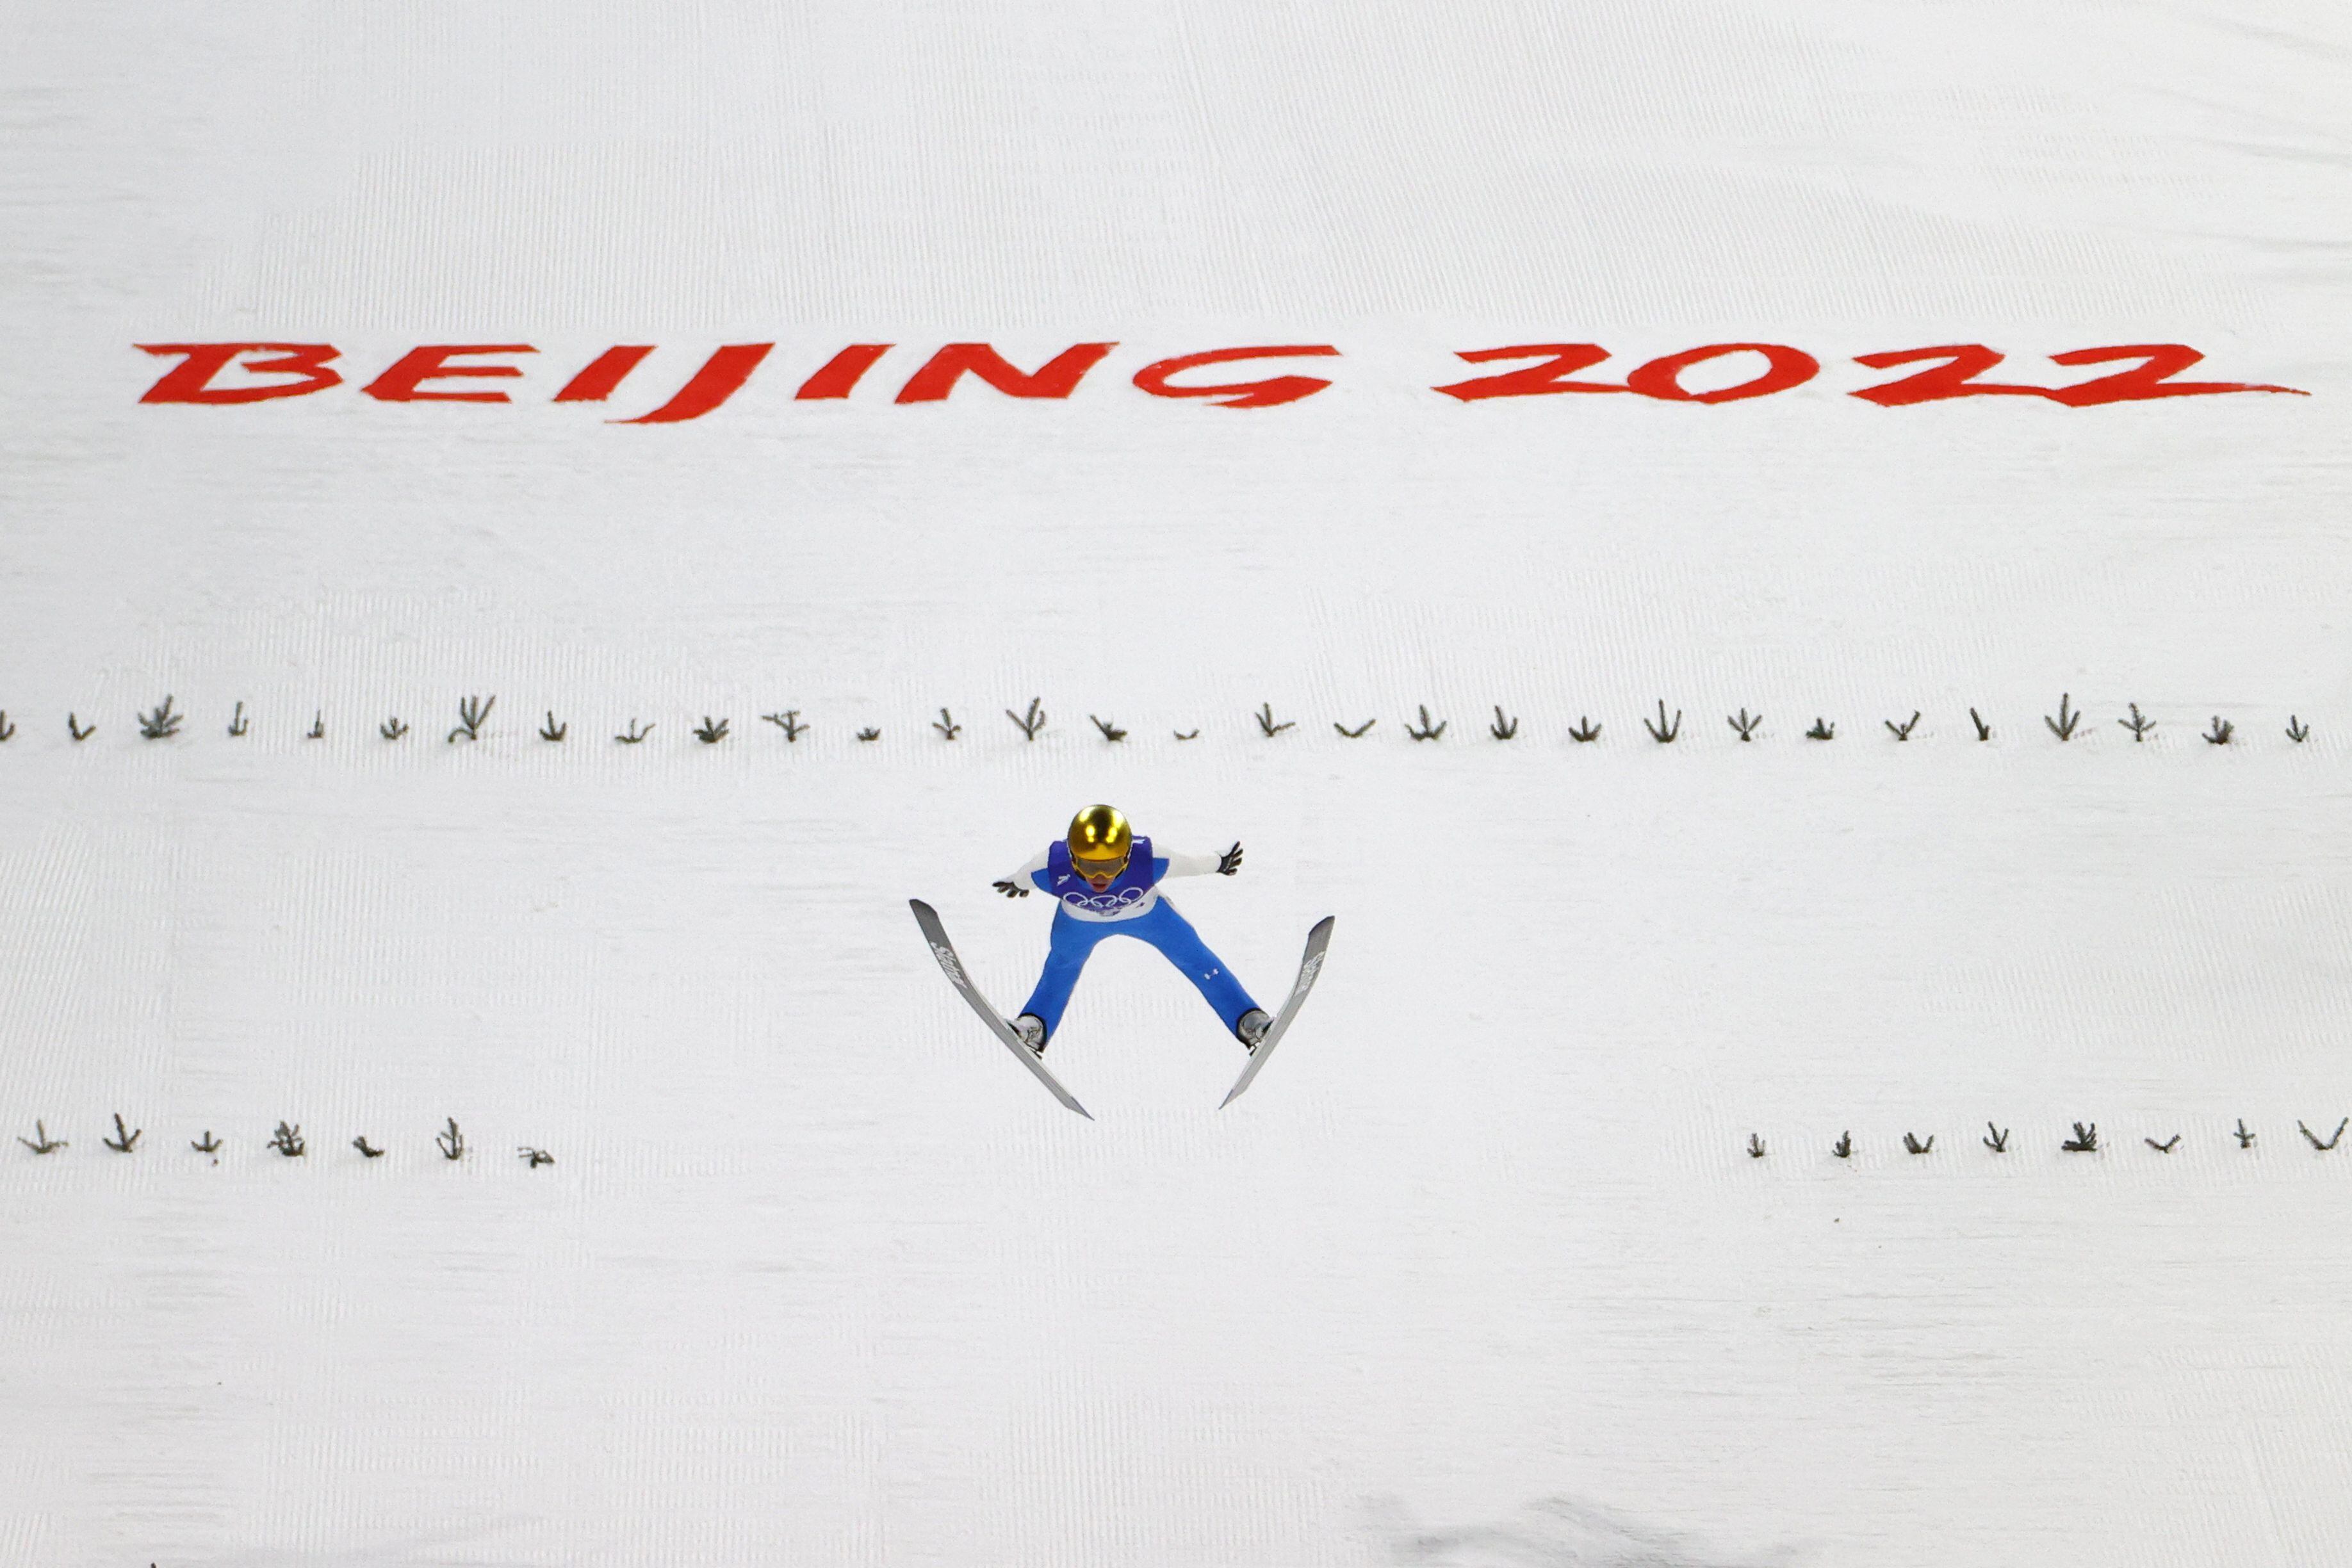 5 Olympic Ski Jumpers Disqualified from Mixed Team Event over